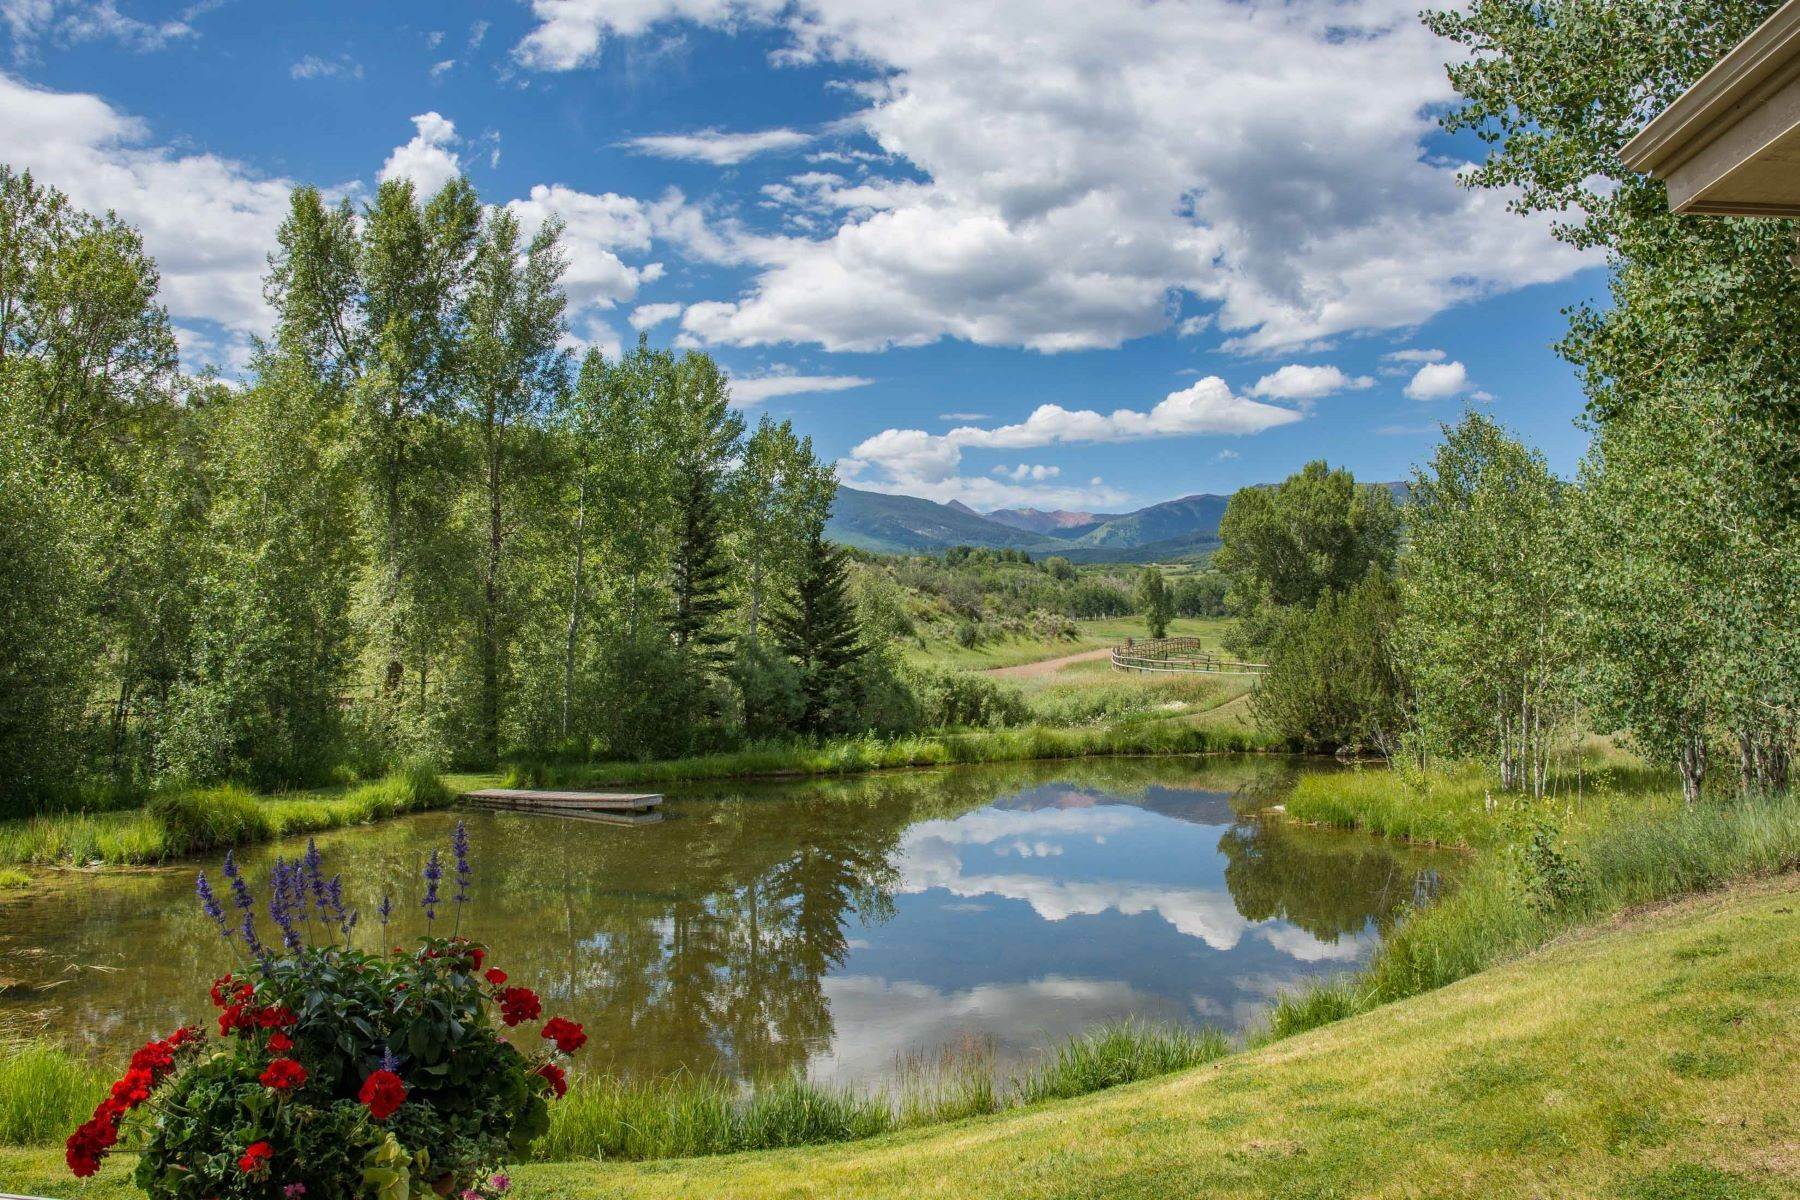 Farm and Ranch Properties のために 売買 アット RARE and UNIQUE opportunity to own the heart of the renowned McCabe Ranch! 1321 Elk Creek & TBD McCabe Ranch, Old Snowmass, コロラド 81654 アメリカ